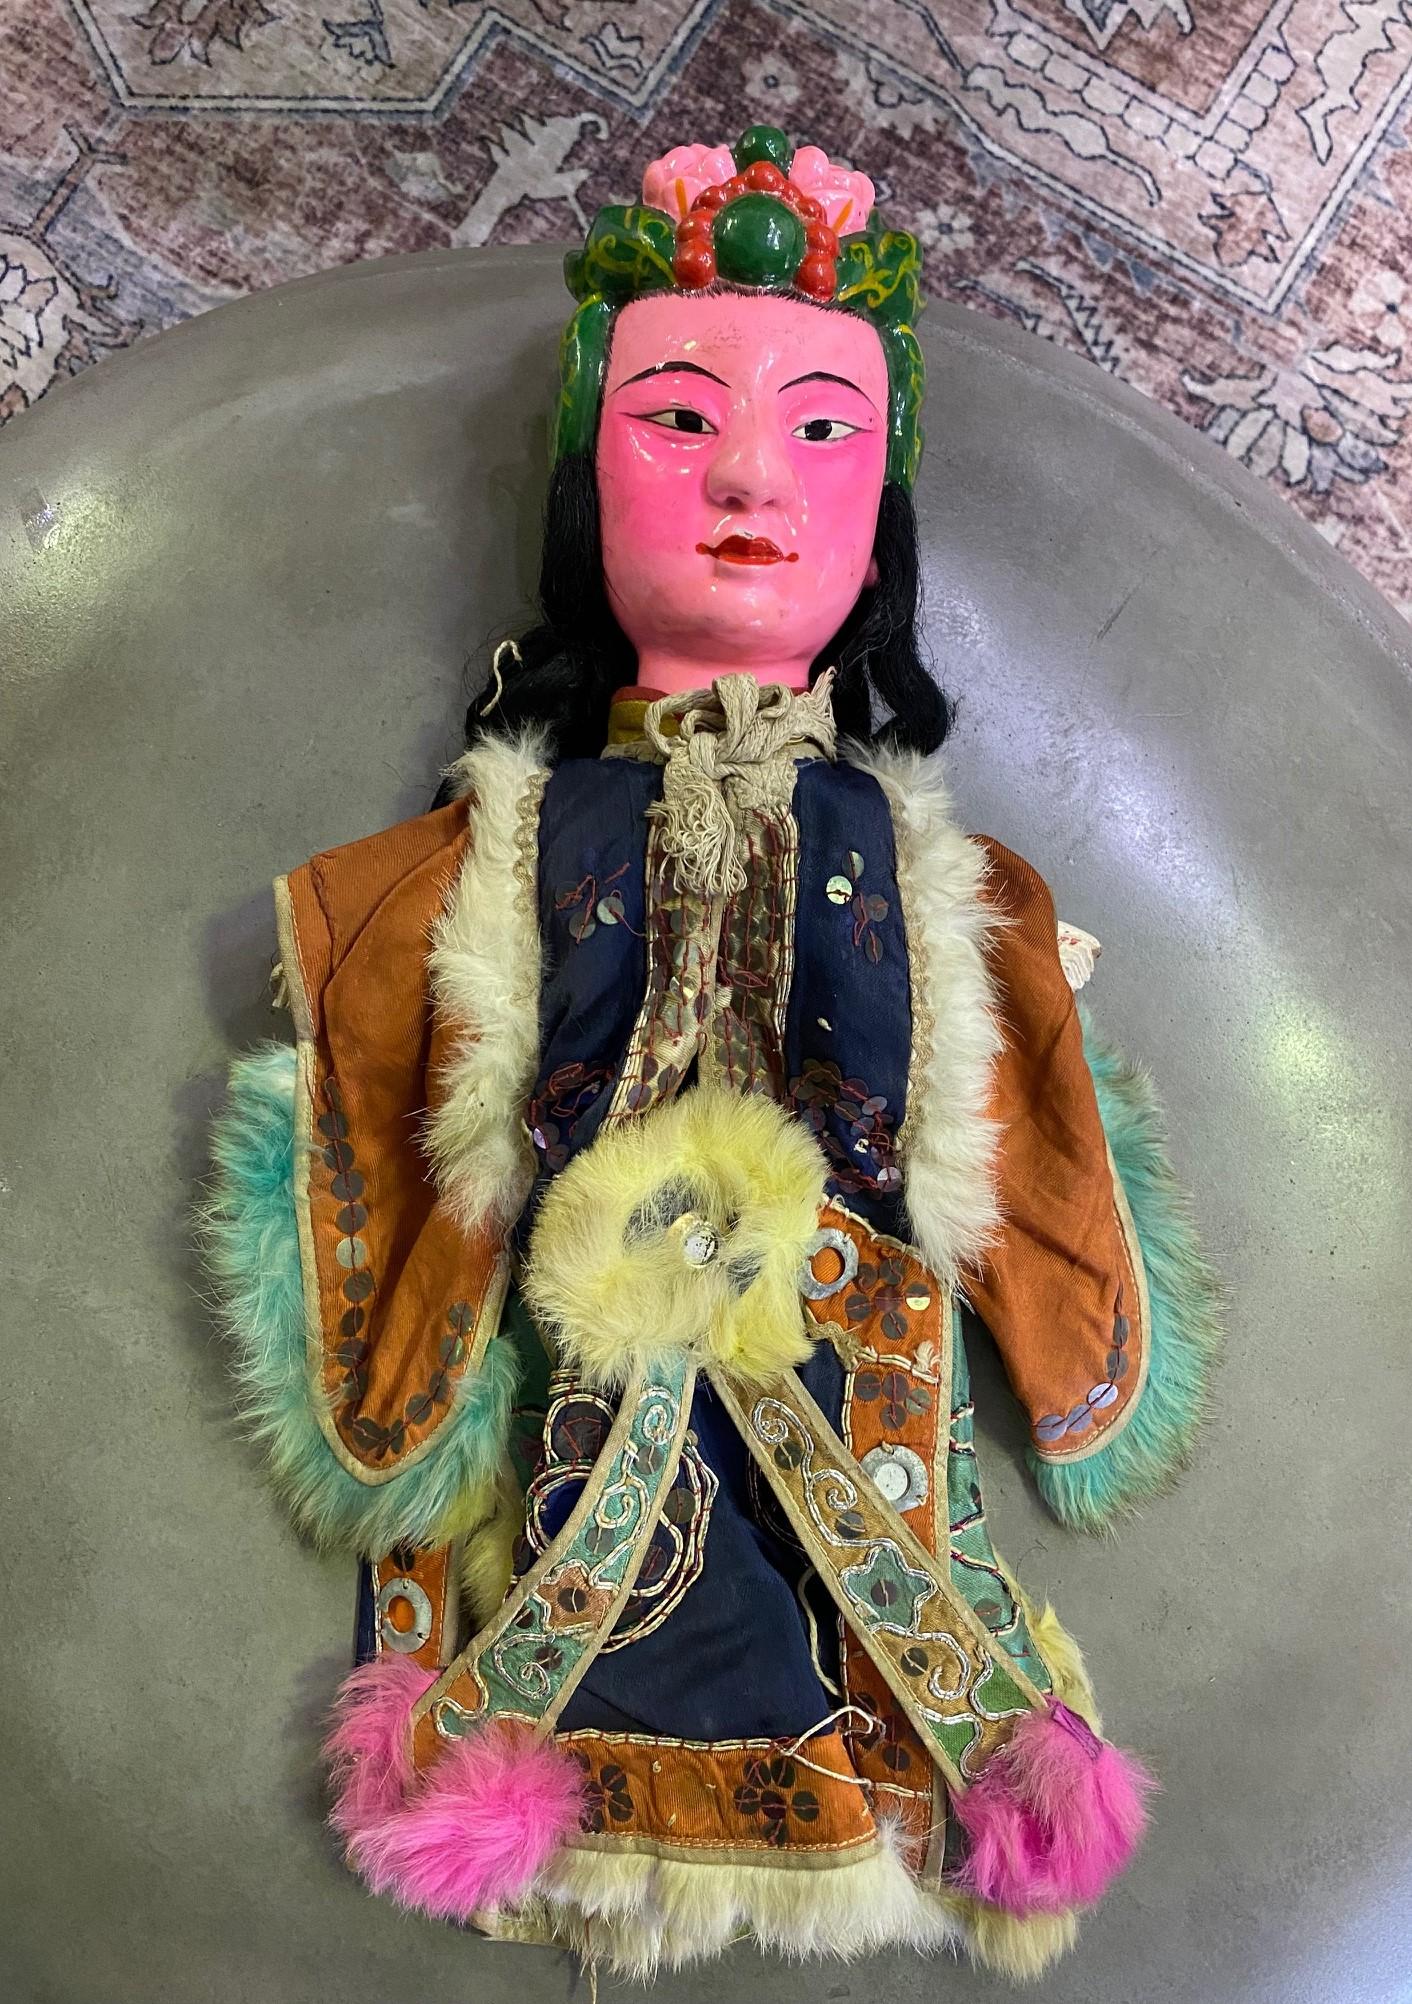 A wonderful work complete with a unique wood-carved and hand-painted face and original textile garment. 

From a group of 7 Chinese opera puppets, we acquired from a collector. Each puppet shows clear signs of previous stage use.

Likely from